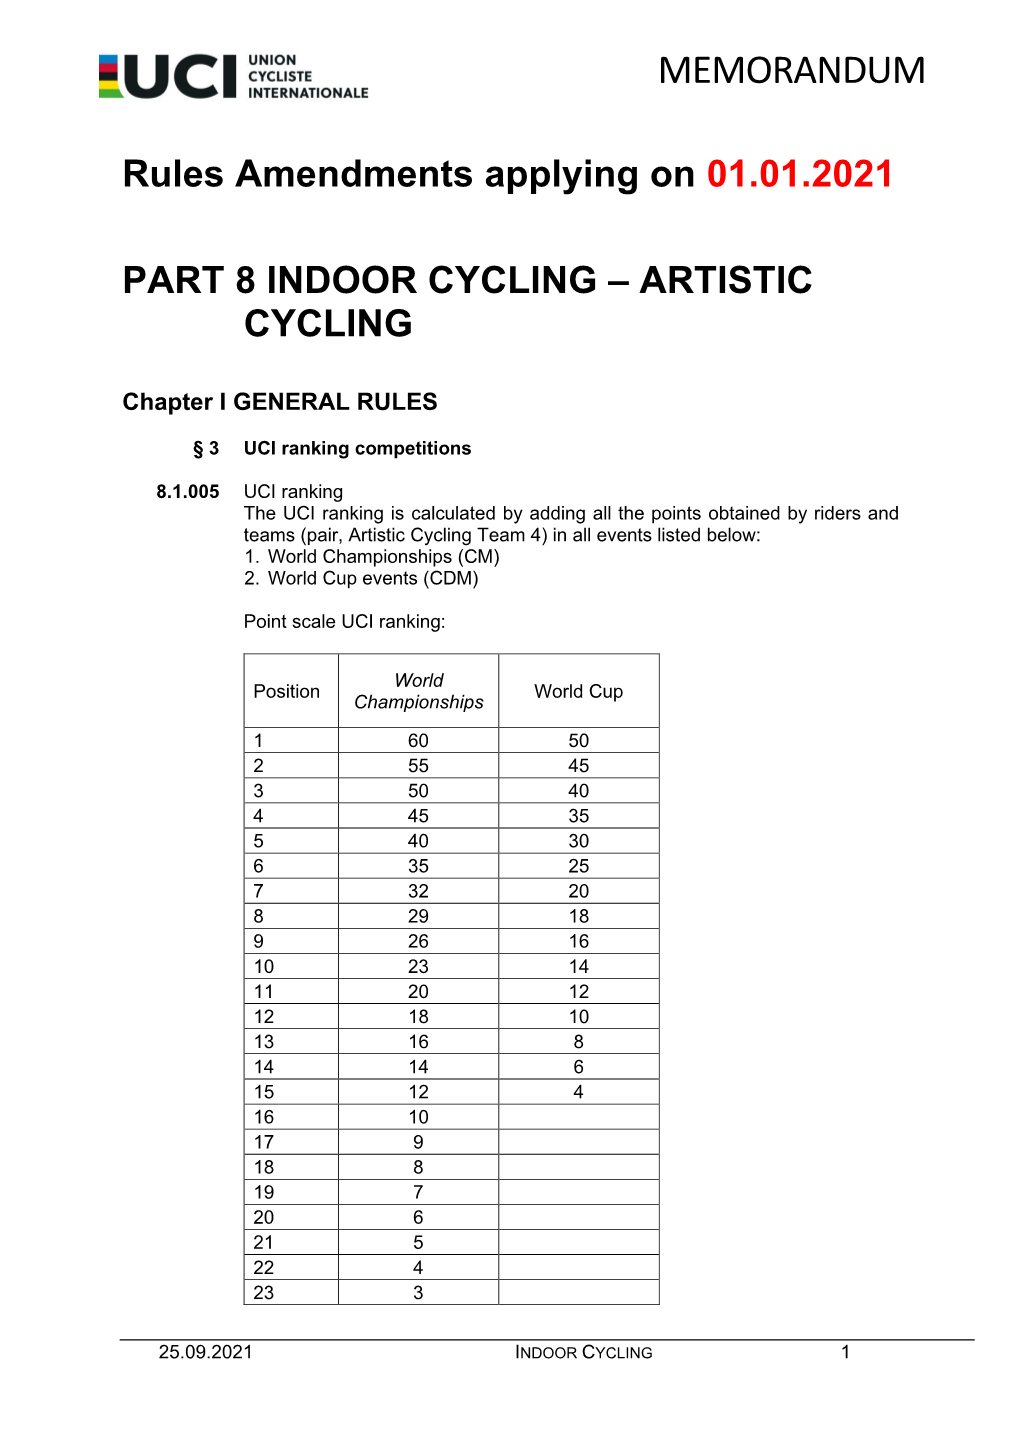 Indoor Cycling – Artistic Cycling